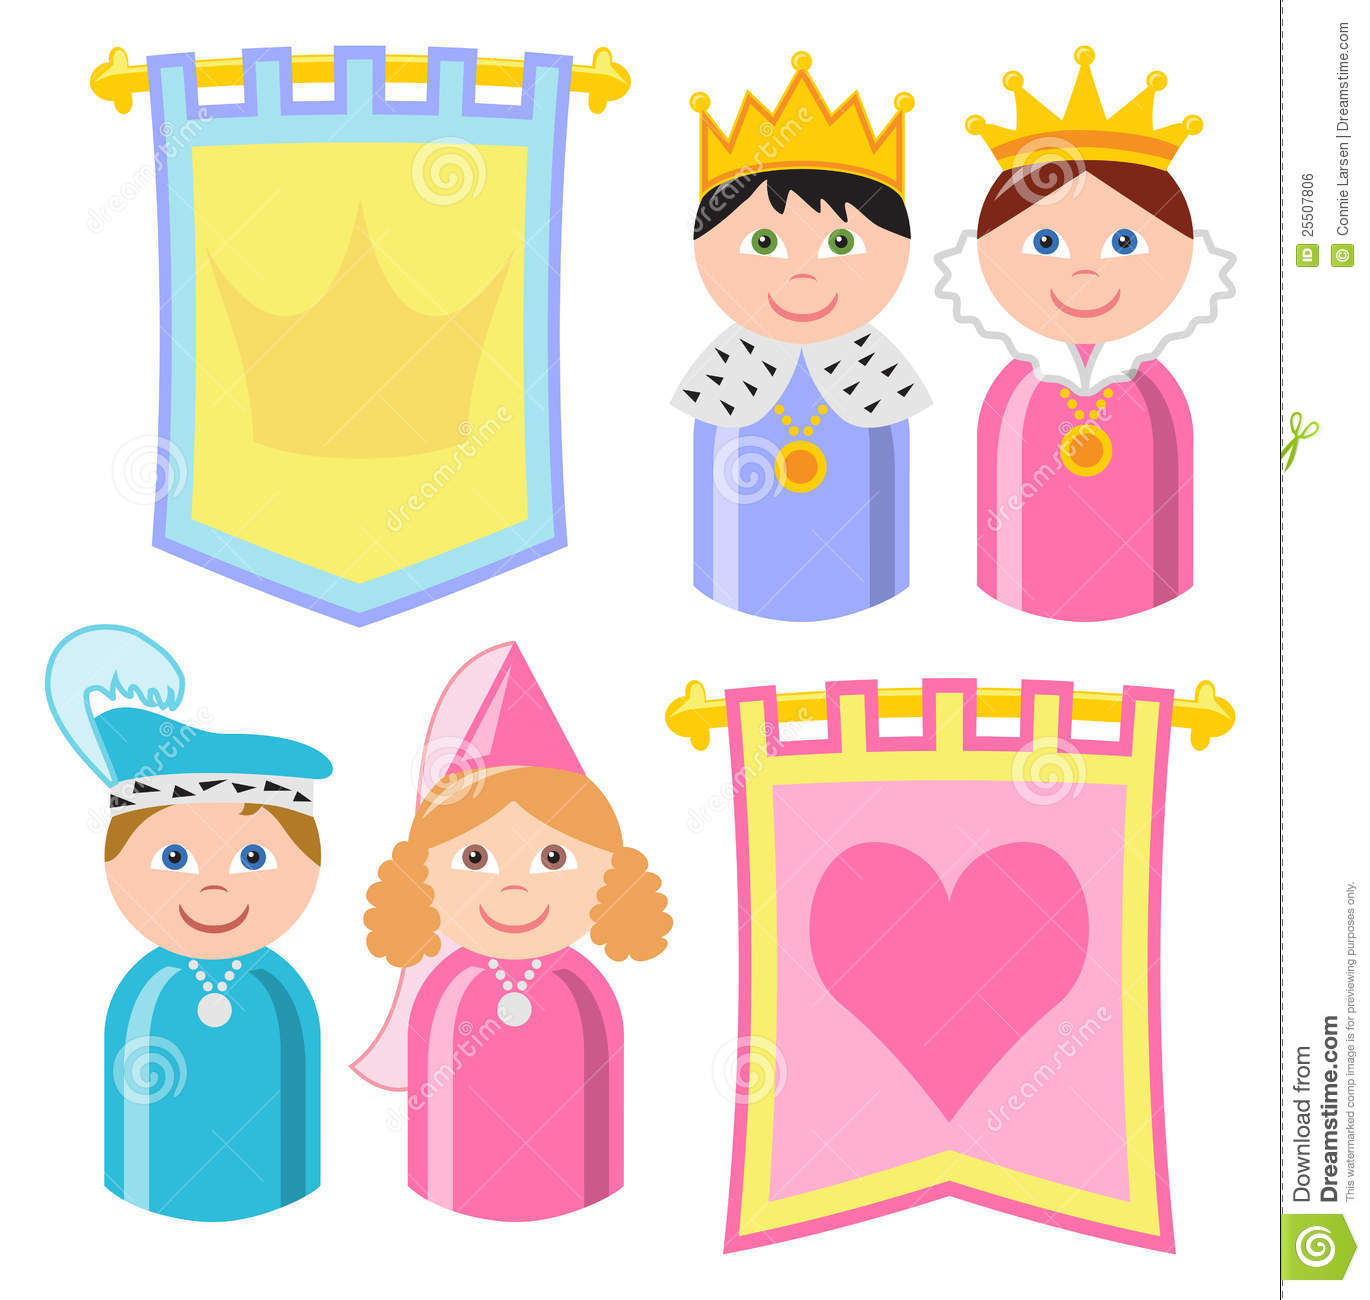 Royal Family Banners Eps Royalty Free Stock Image